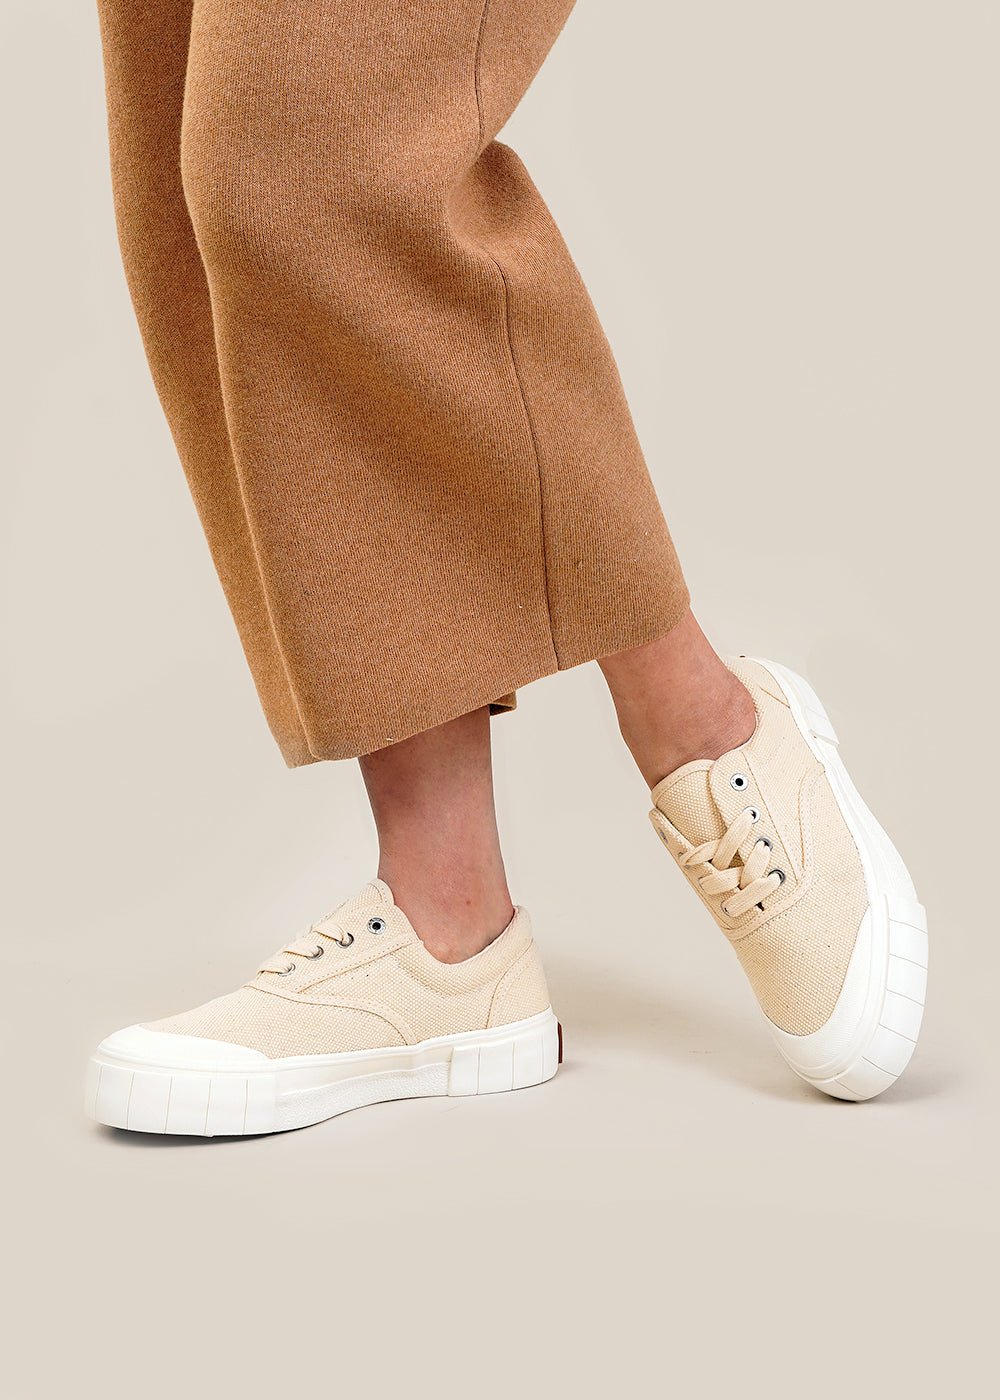 GOOD NEWS Oatmeal Opal Core Sneakers - New Classics Studios Sustainable Ethical Fashion Canada